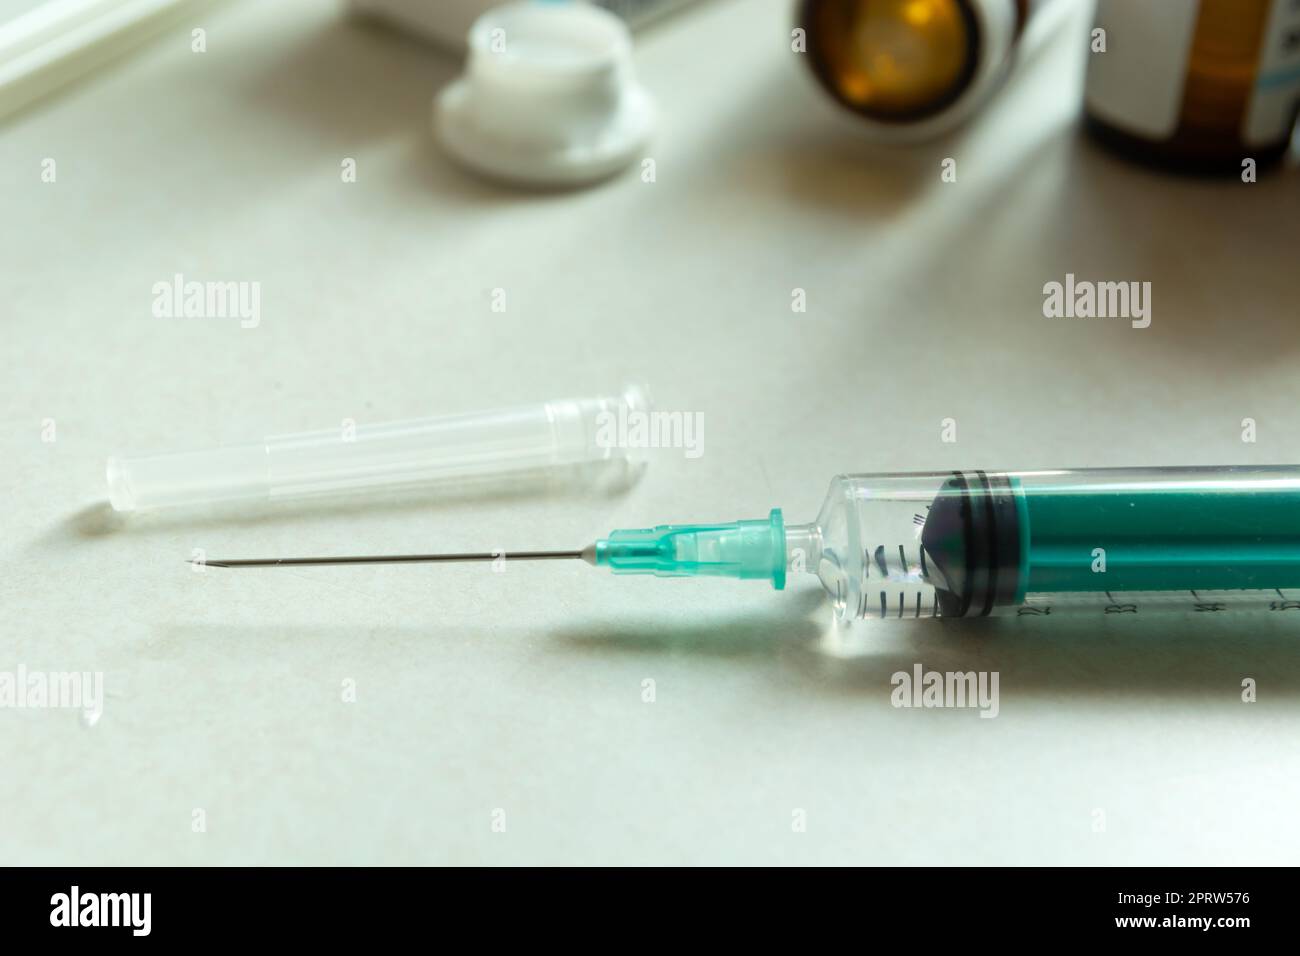 Closeup of a syringe with a needle on the countertop Stock Photo